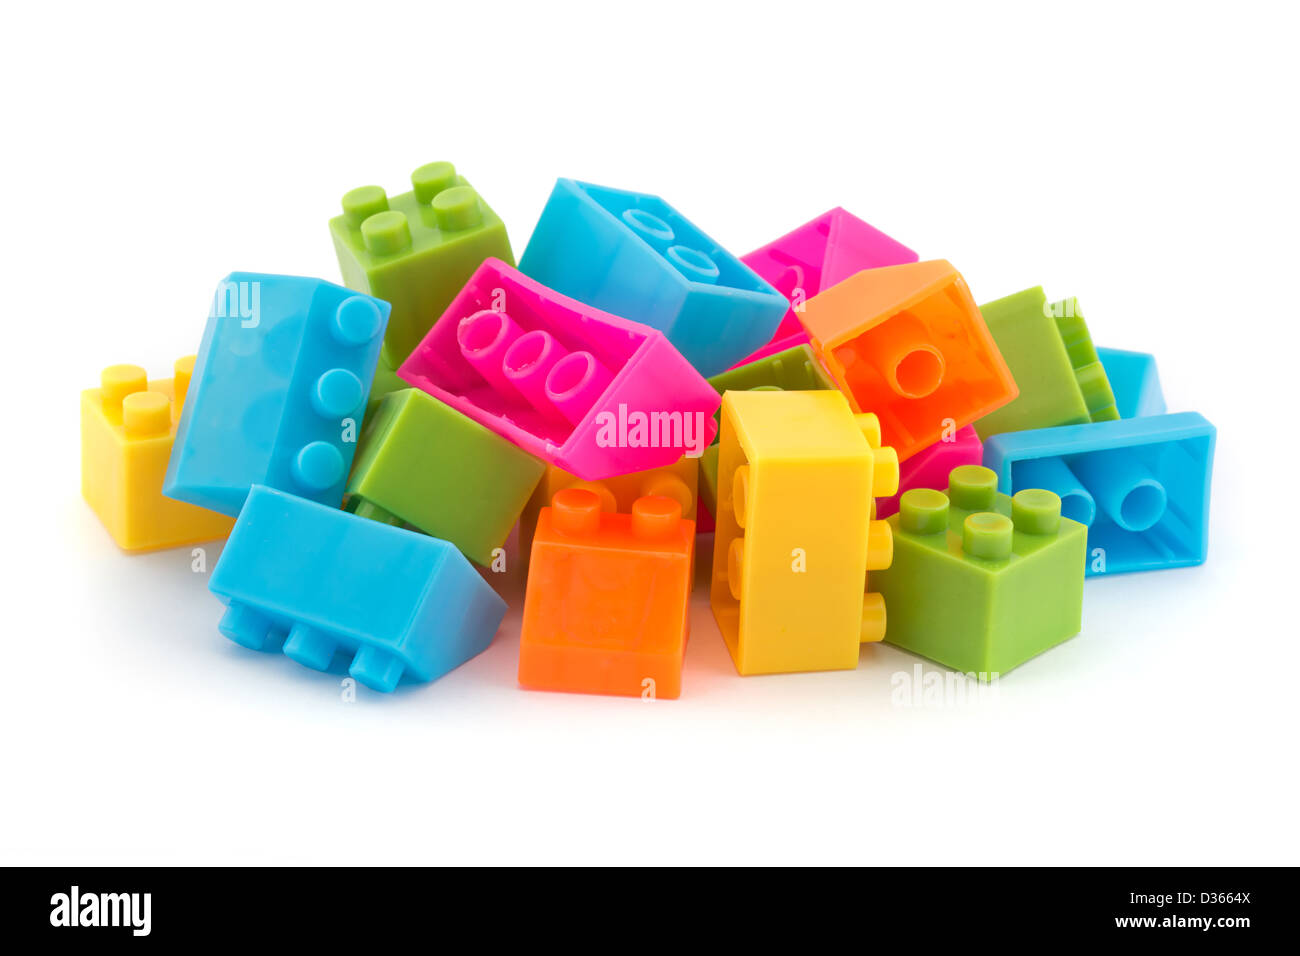 Small pile of colorful childrens building bricks on white Stock Photo